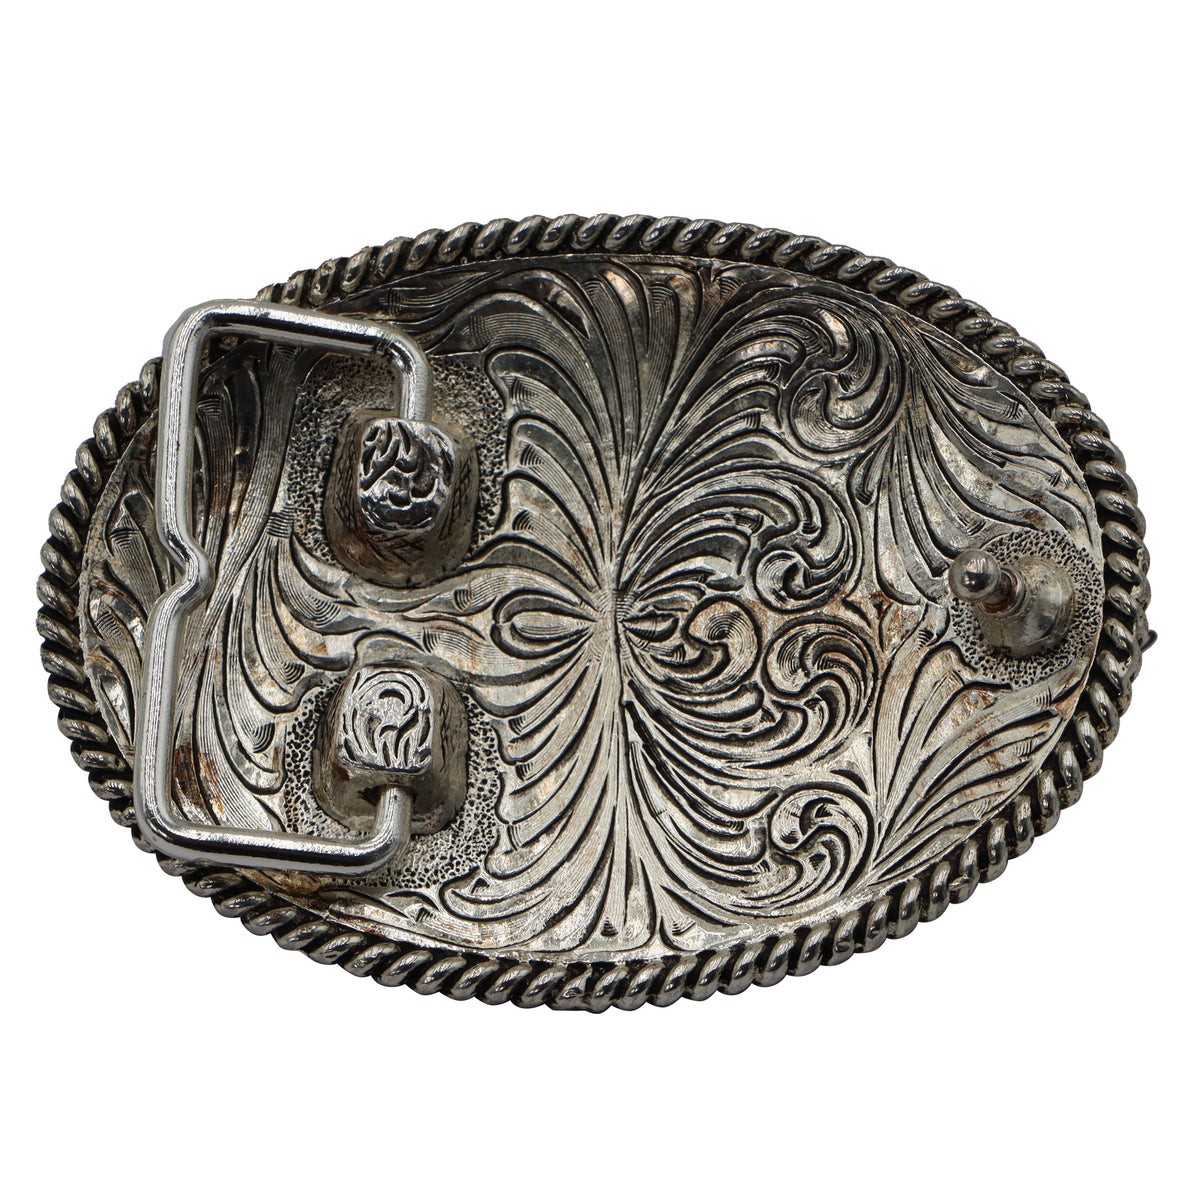 Initial “A” Buckle